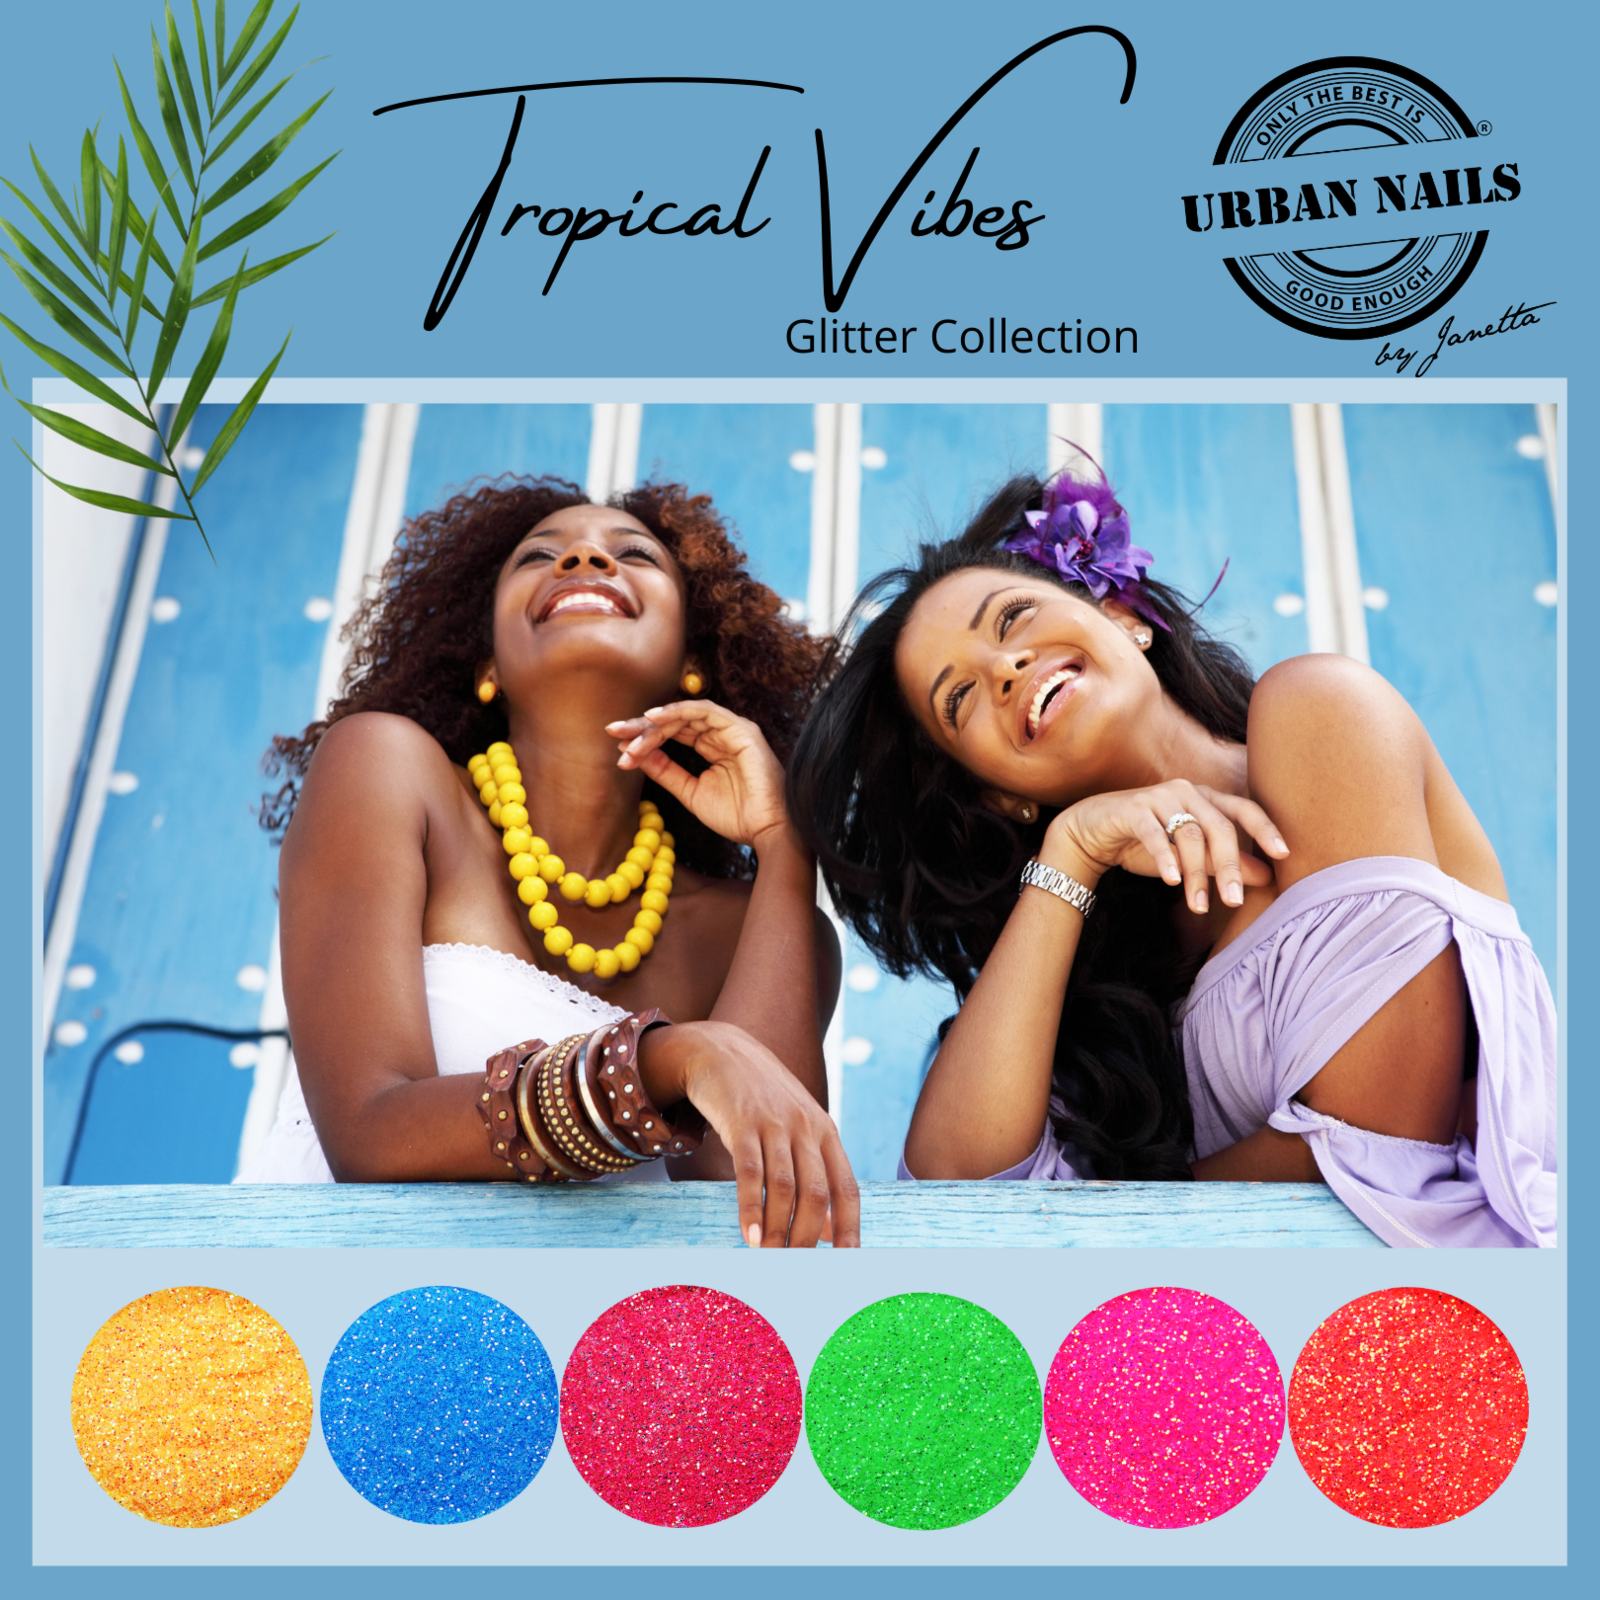 Urban nails Tropical Vibes limited glitter collection